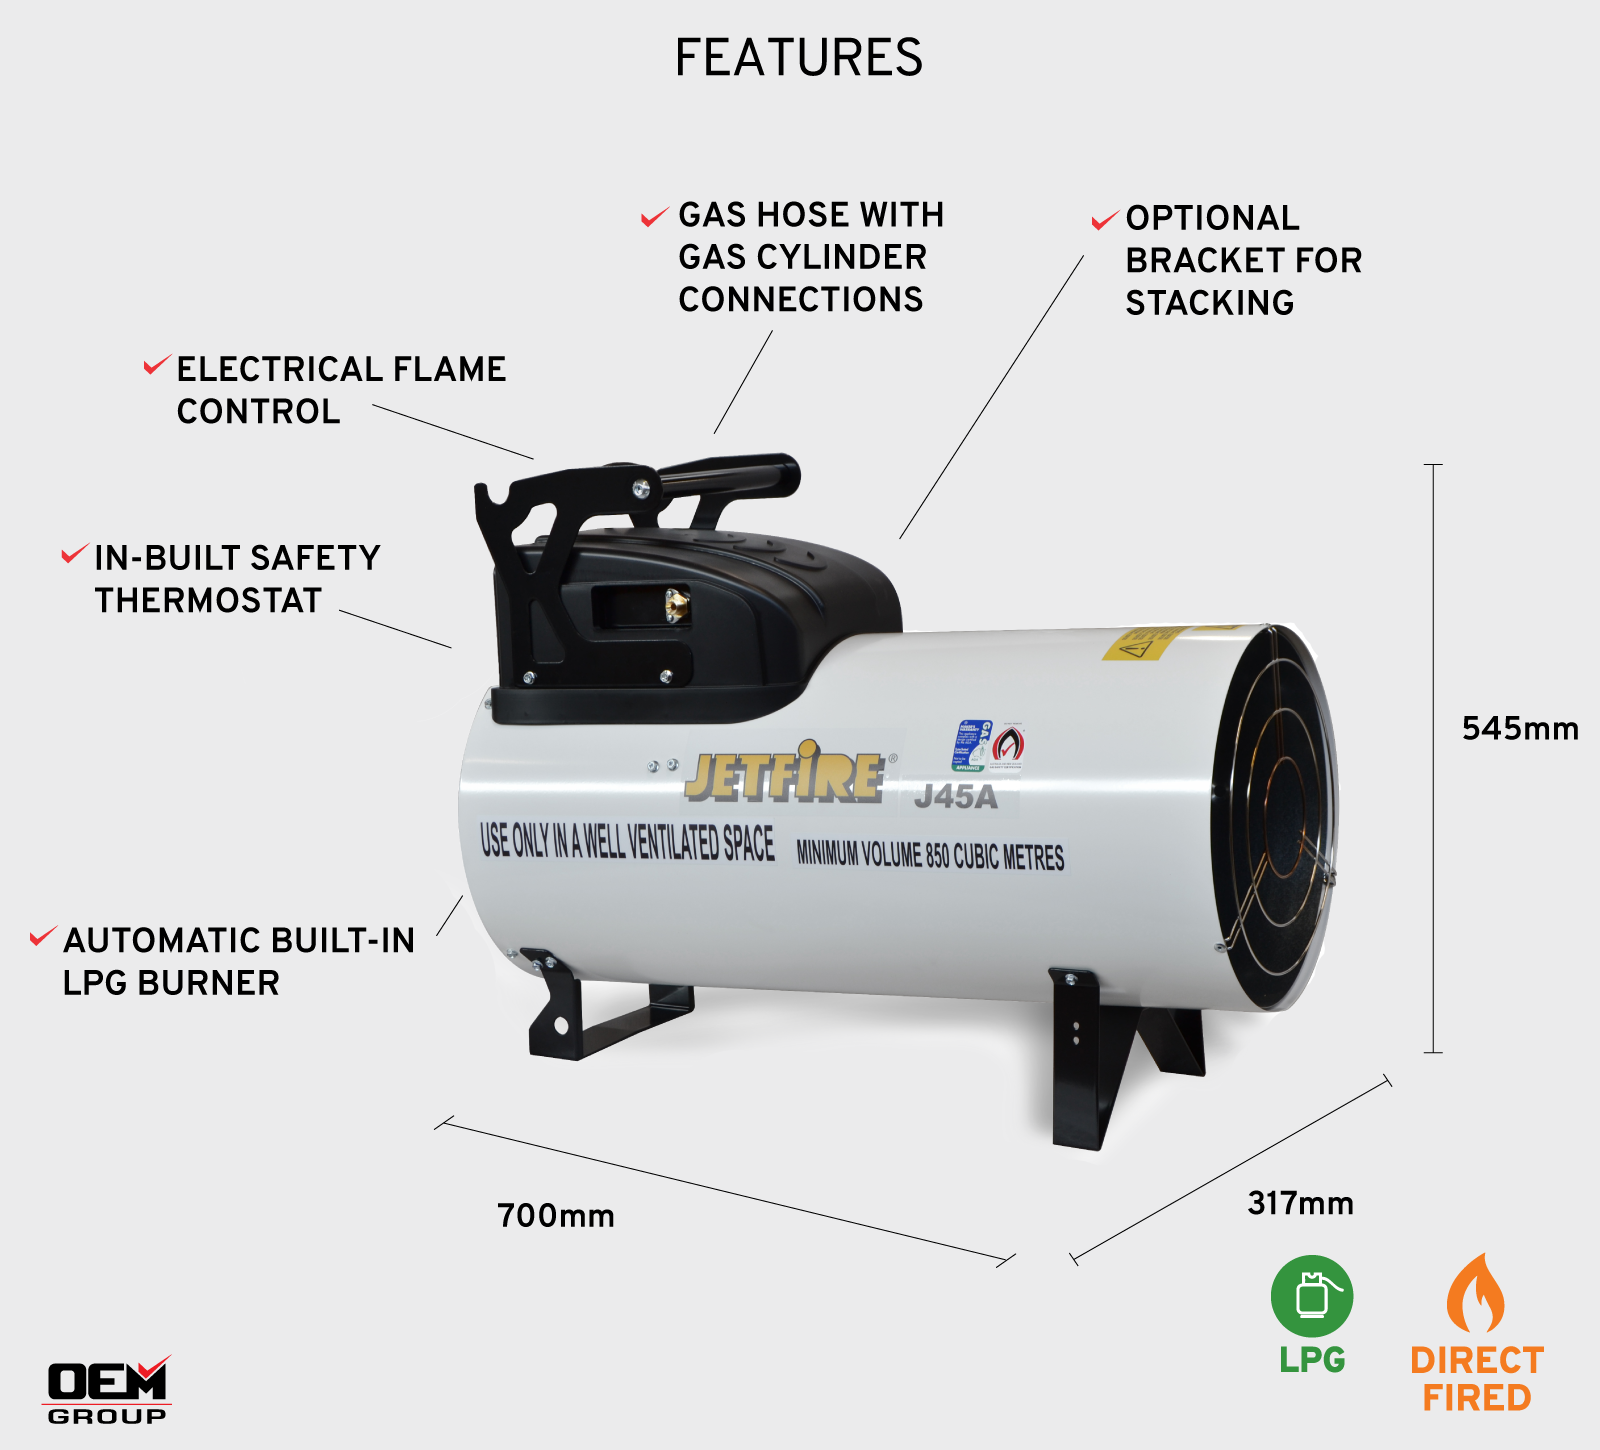 JETFIRE J45A Heater Feature Annotated